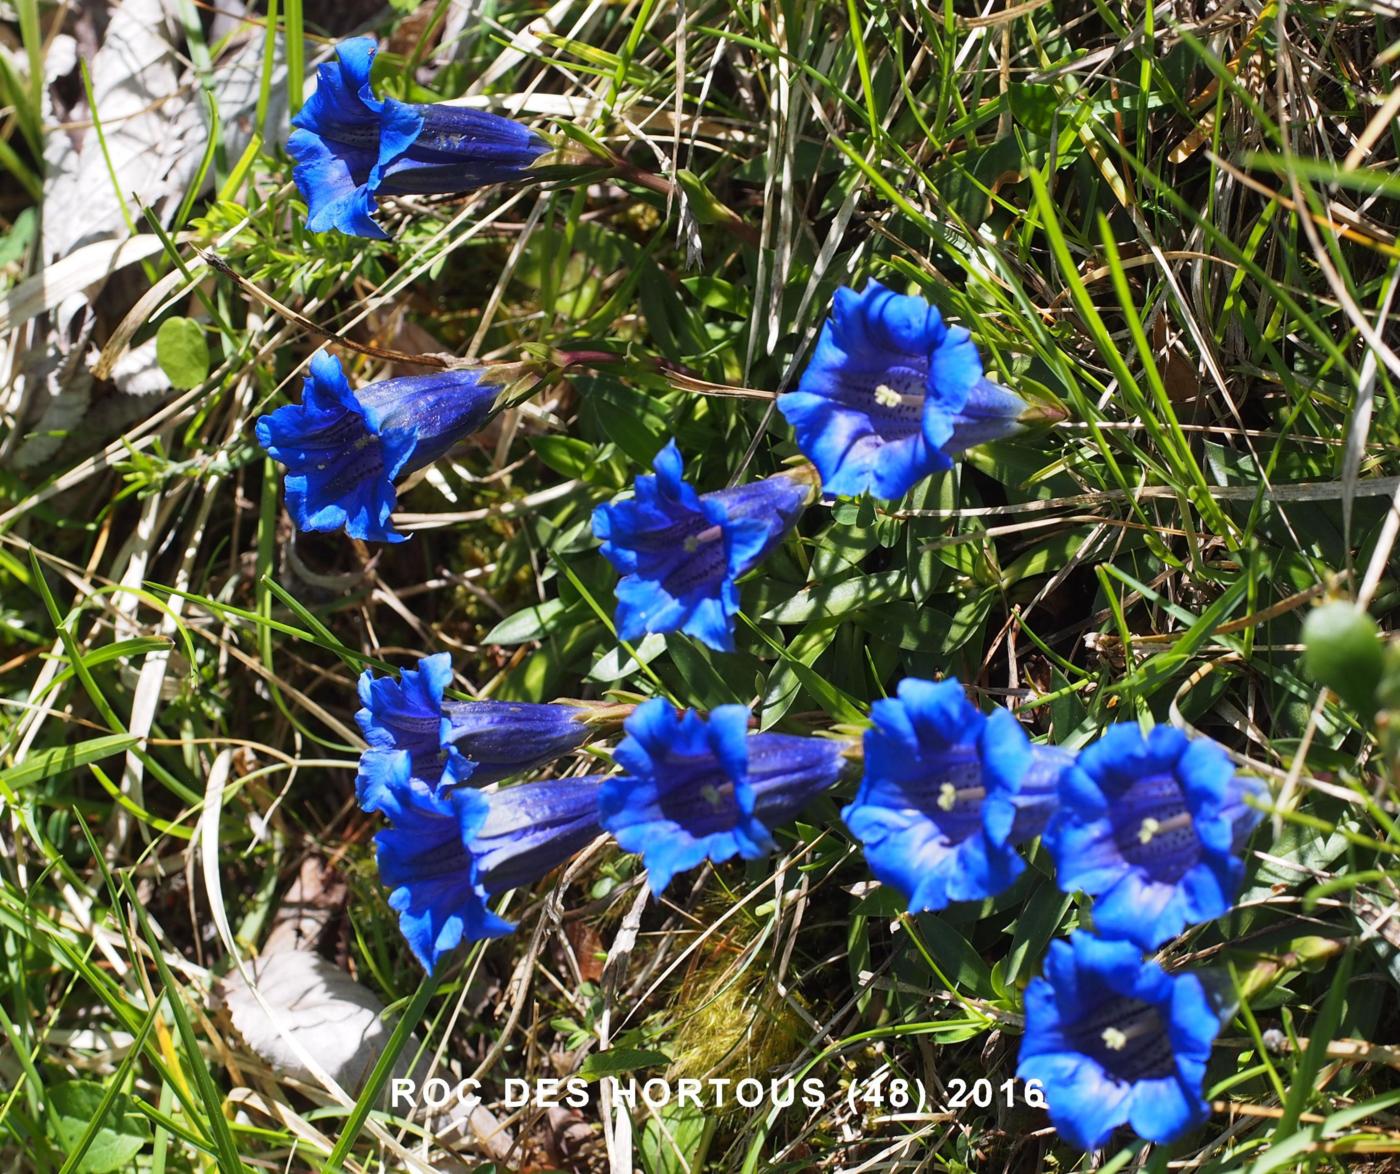 Gentian of the Causse flower